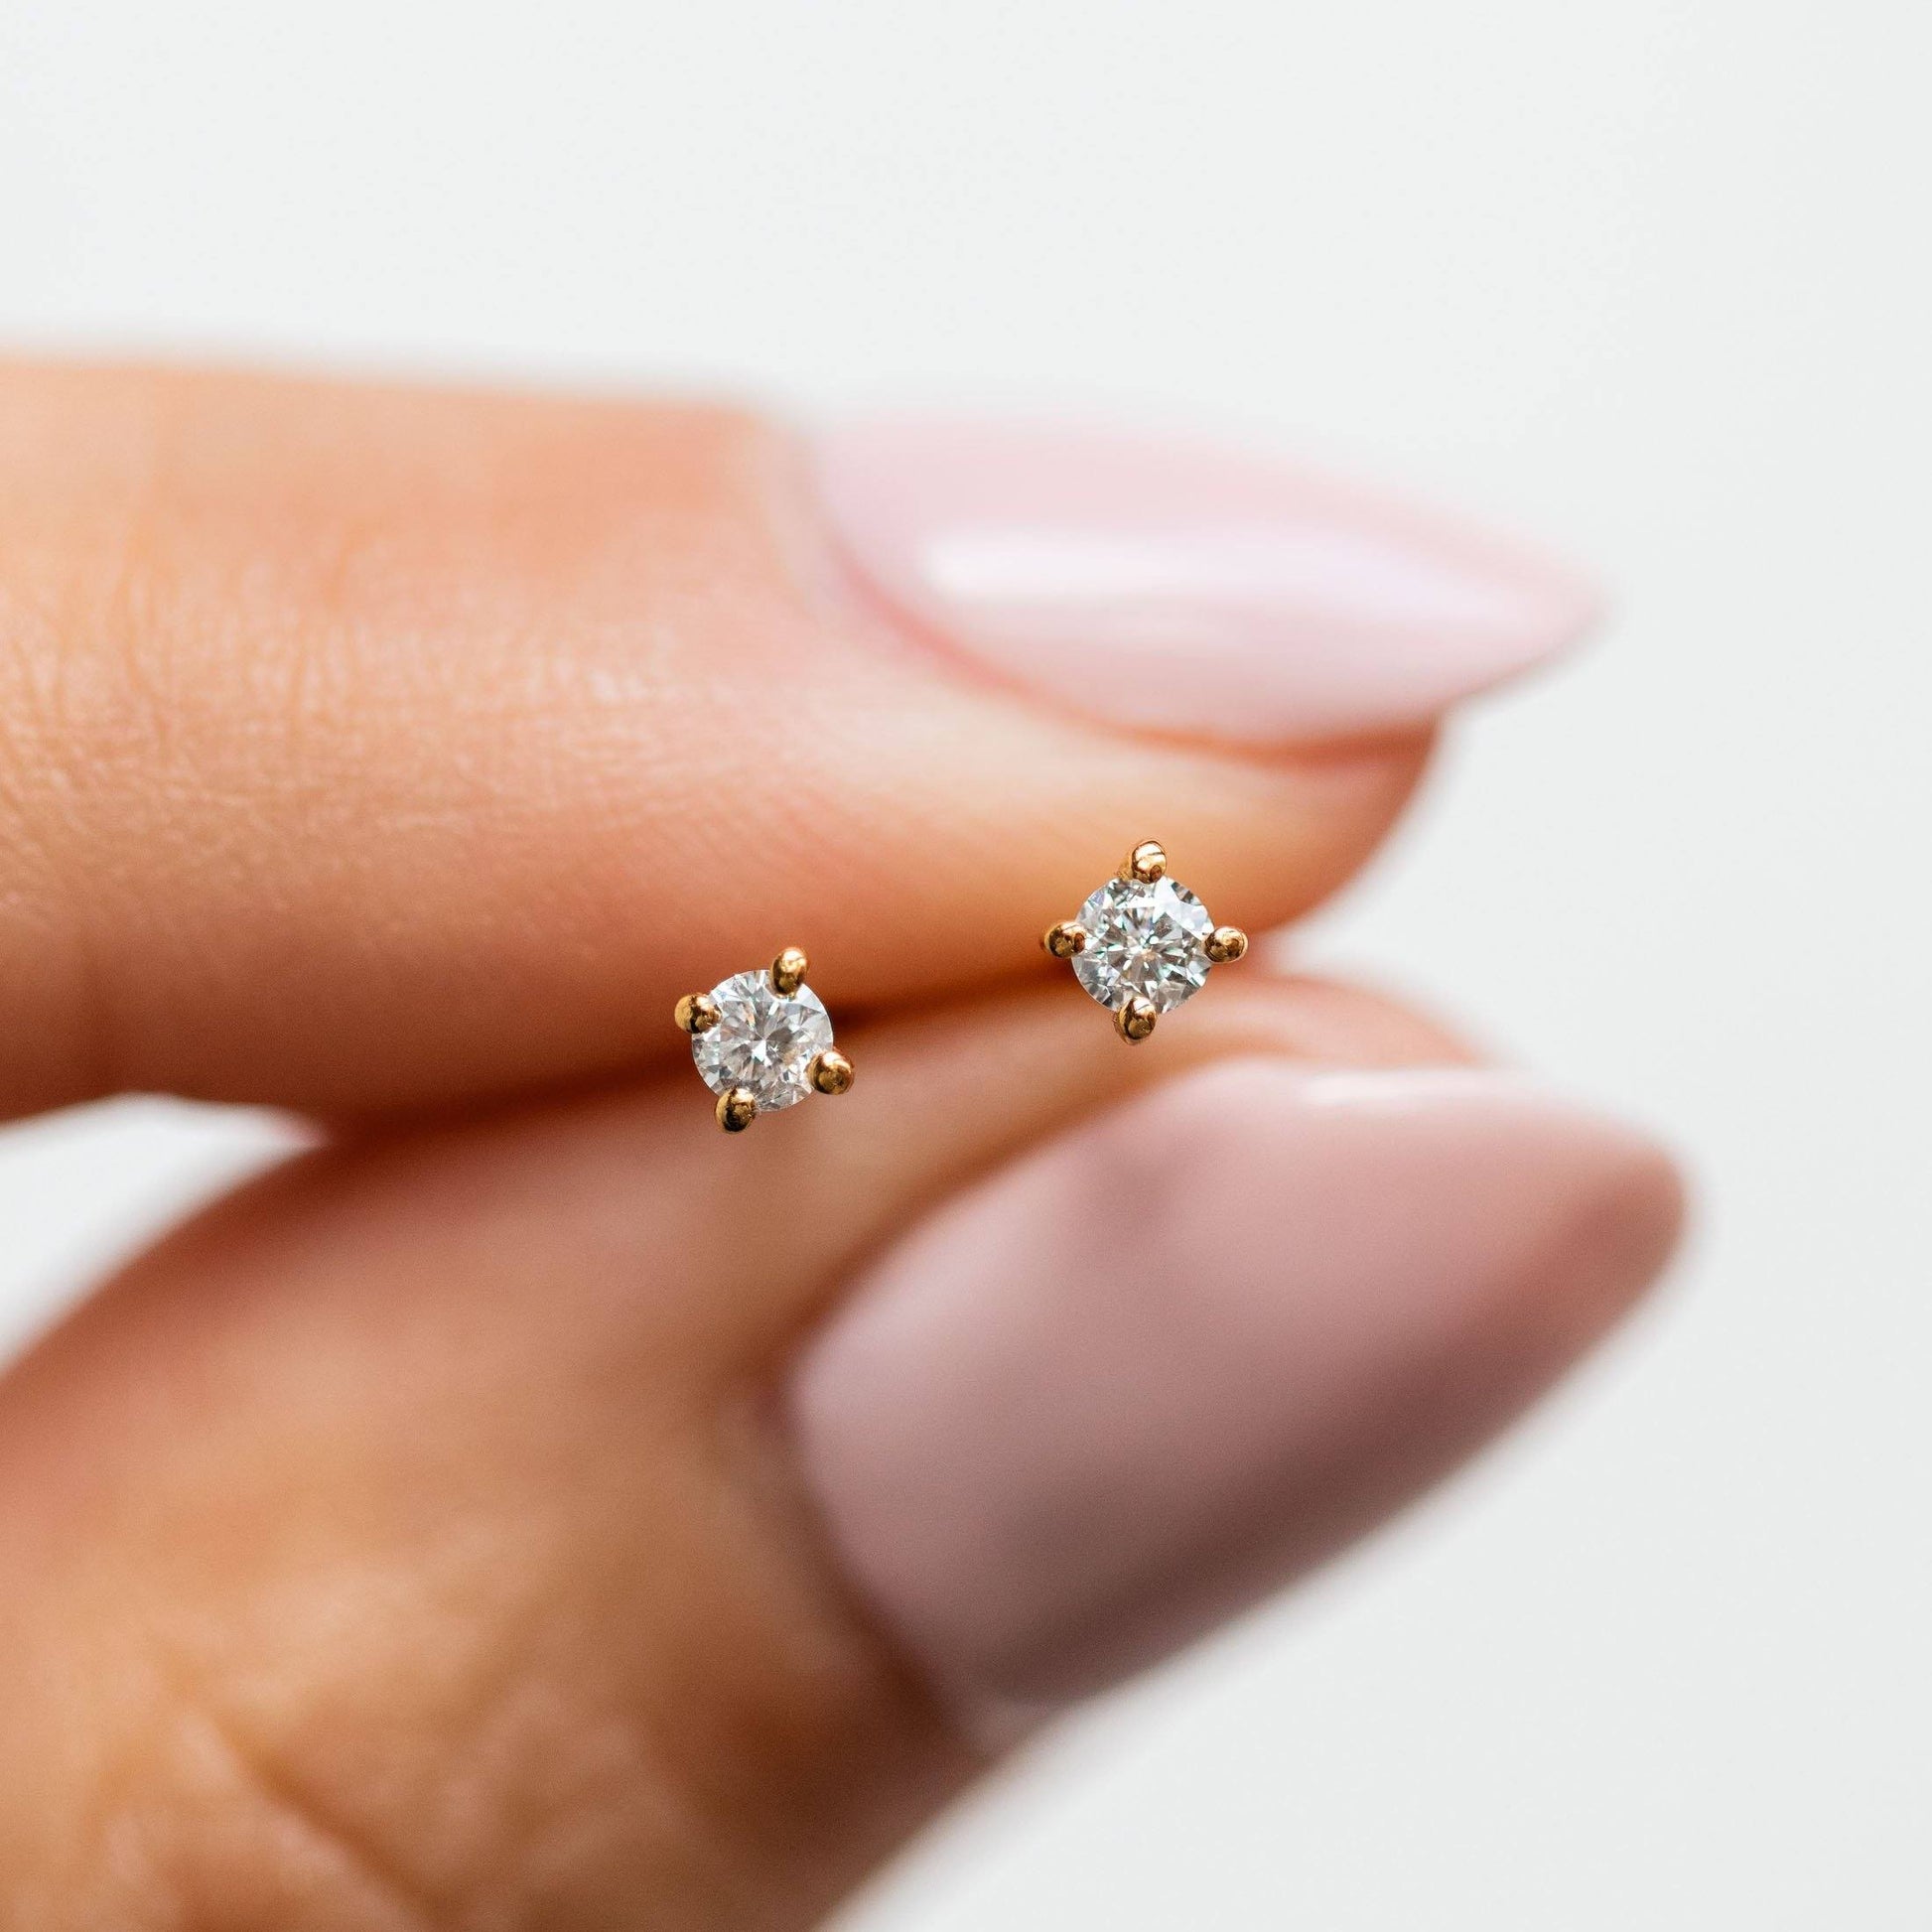 Local Eclectic Tiny Solid Gold Diamond Studs